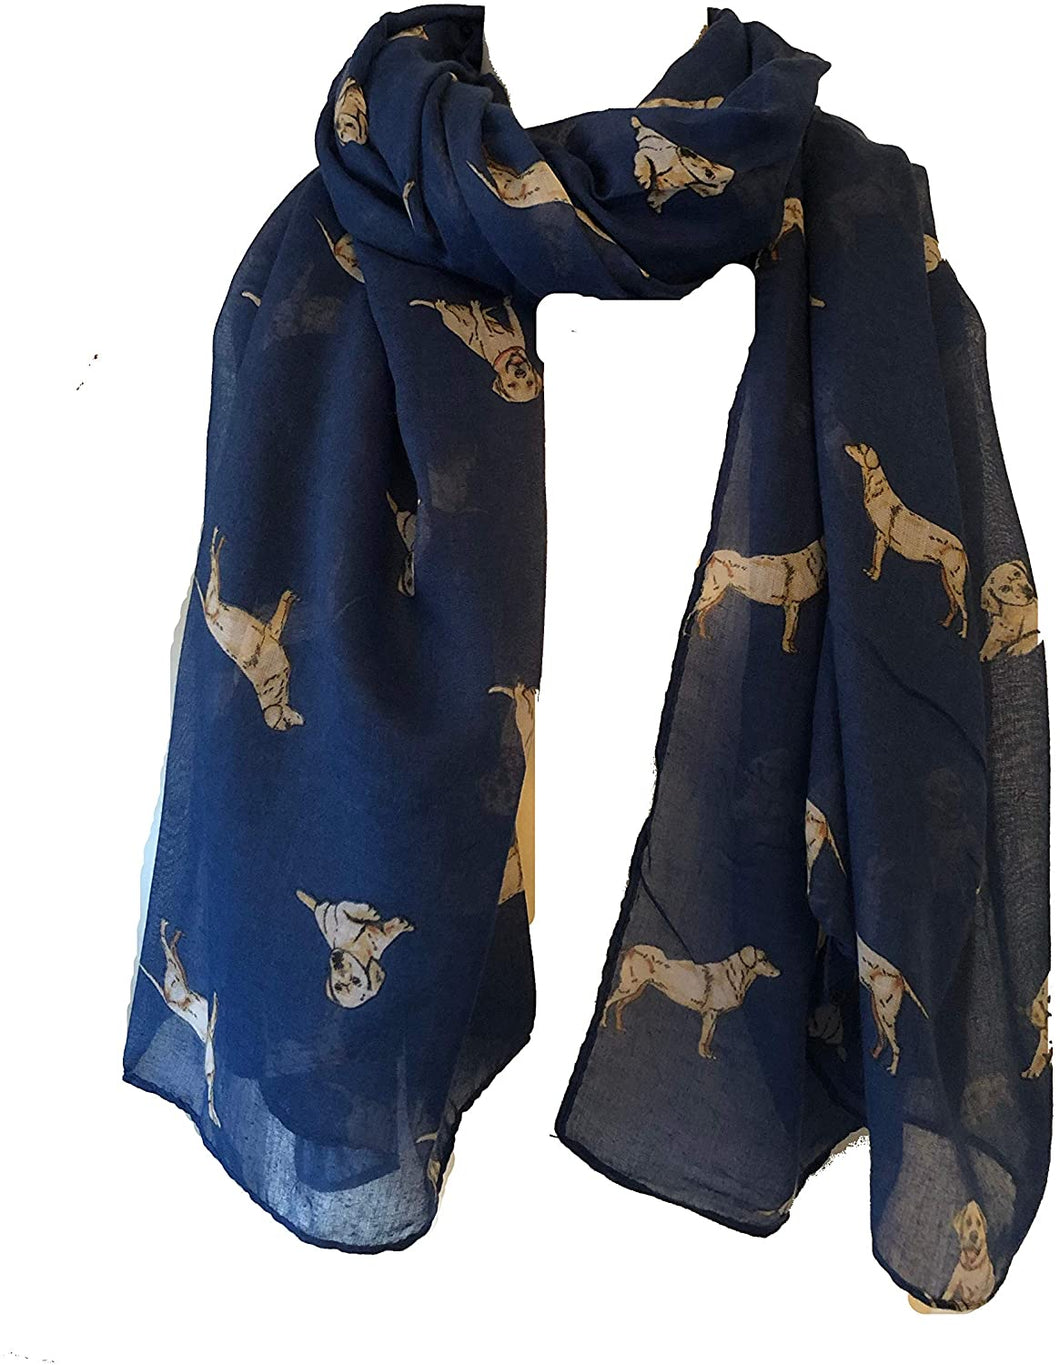 Golden Labrador Retriever ladies dog long scarf/wrap. Great for presents/gifts for retriever dog lovers.